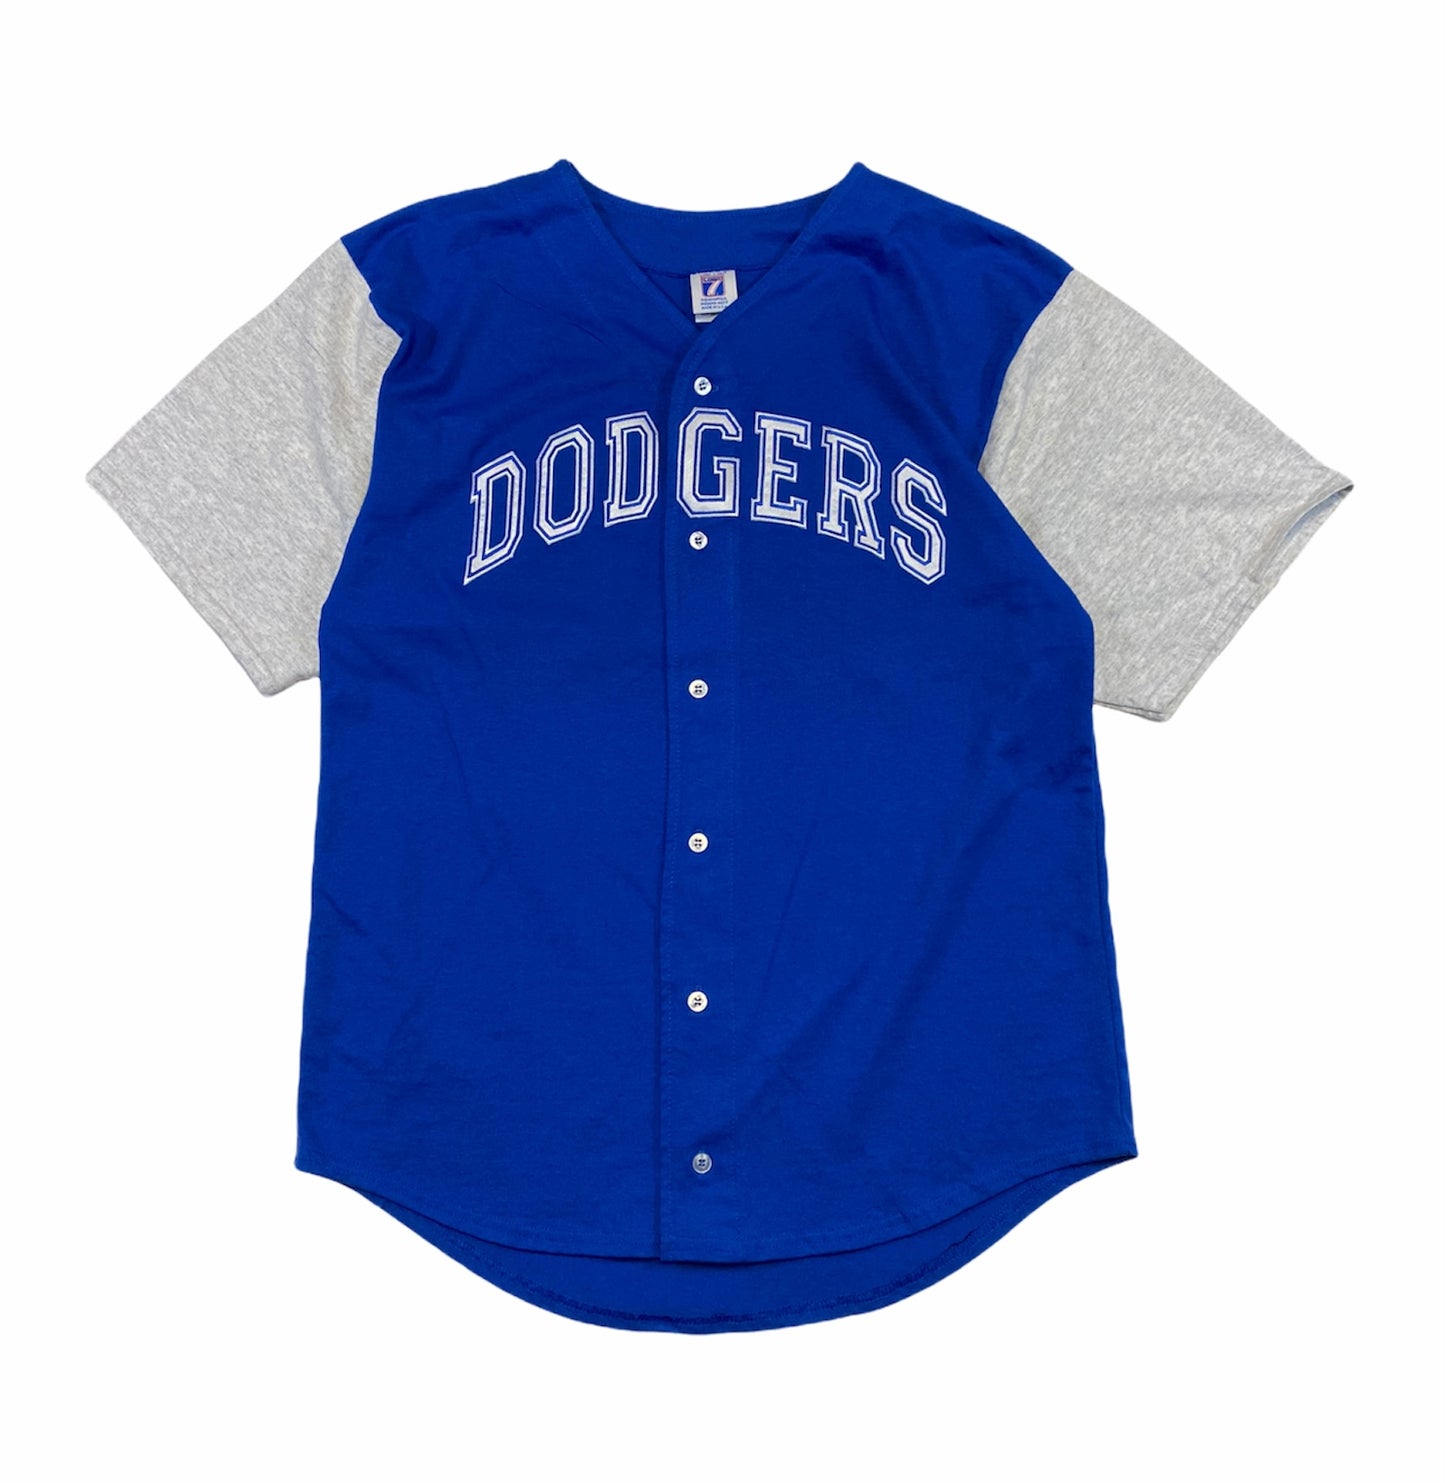 1990’s Logo 7 Kirk Gibson Los Angeles Dodgers MLB Jersey